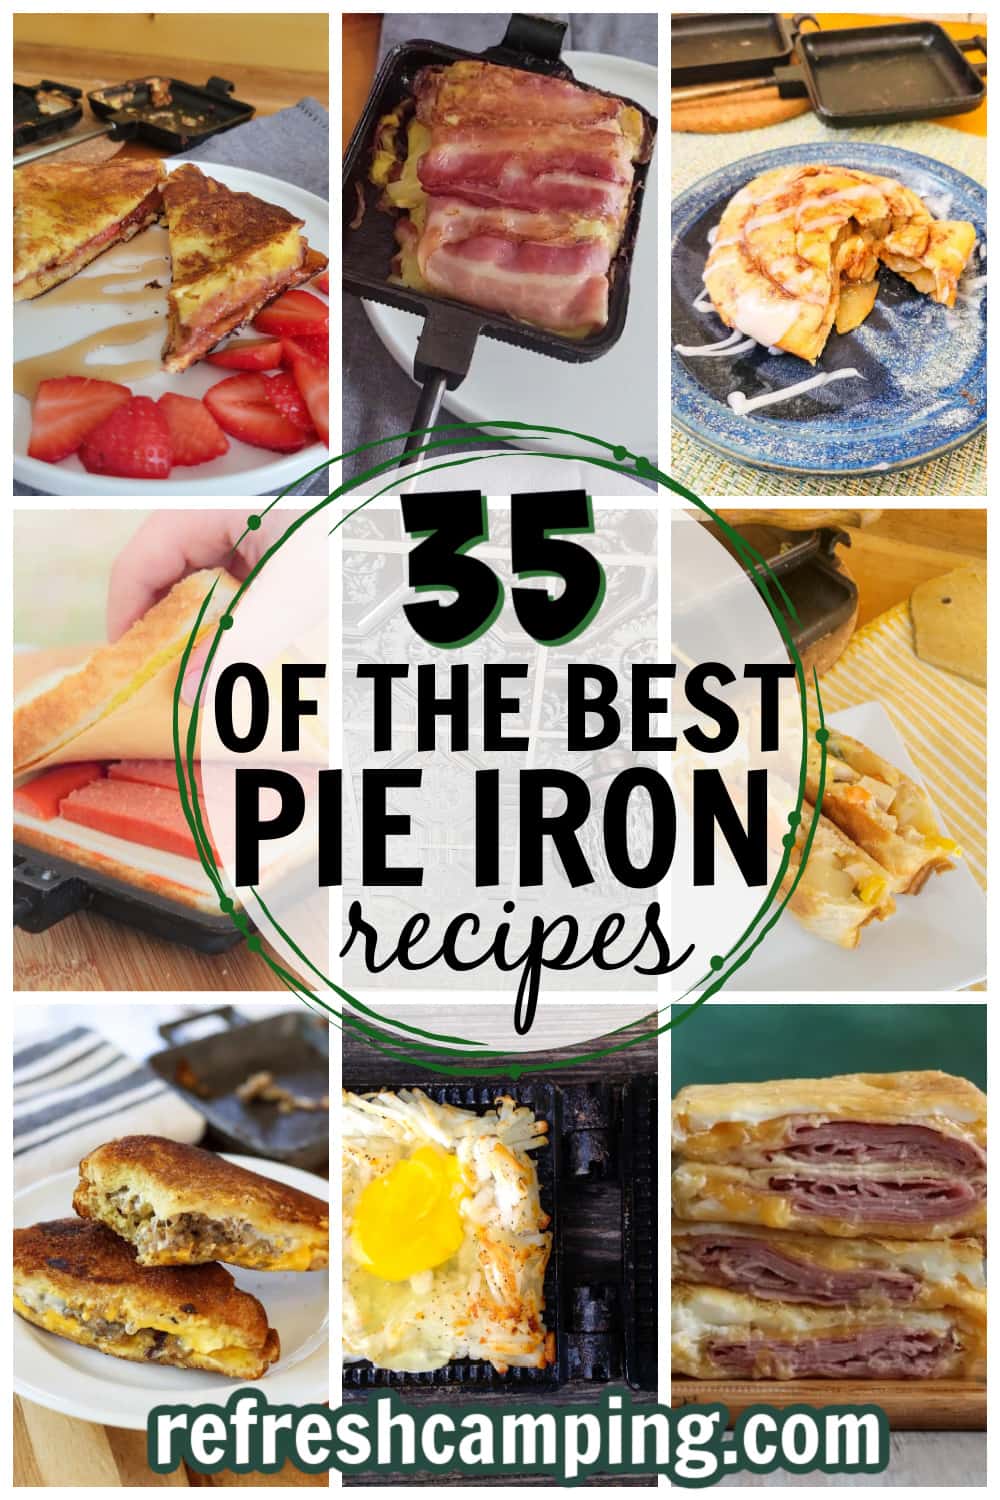 25+ Pie Iron Recipes for Camping » Homemade Heather